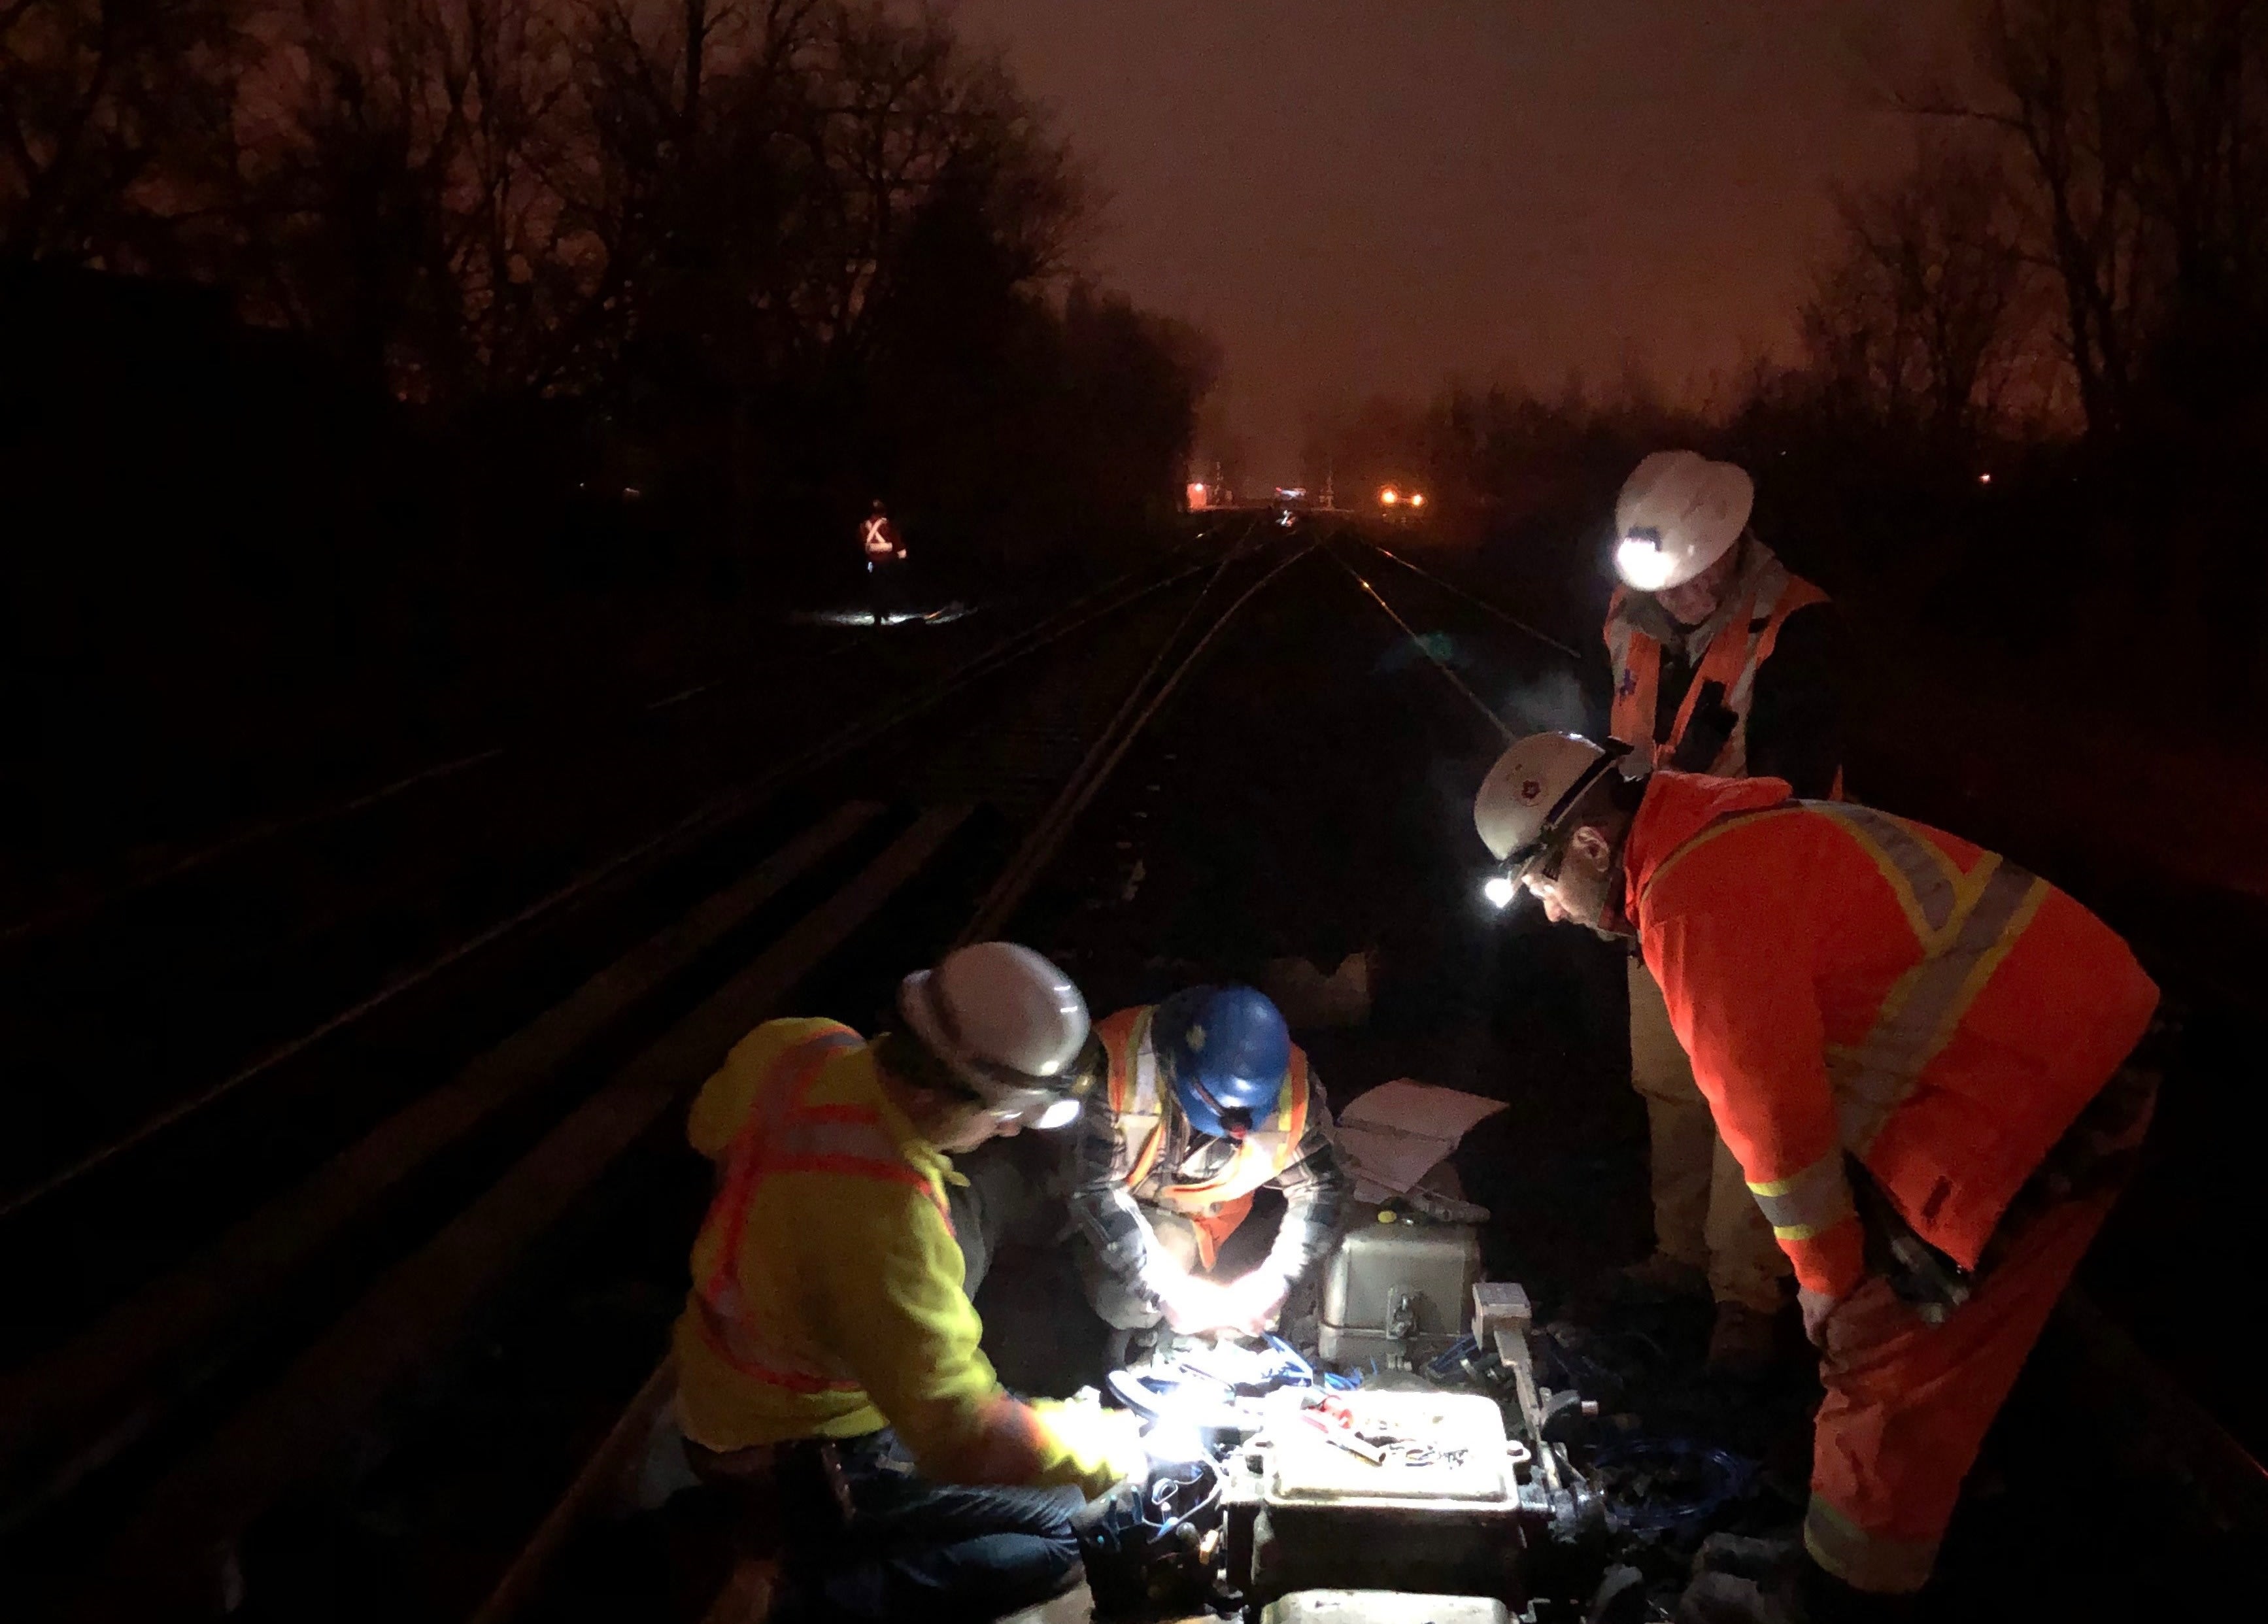 Four workmen toil away in the dark, as they peer into a piece of rail equipment.